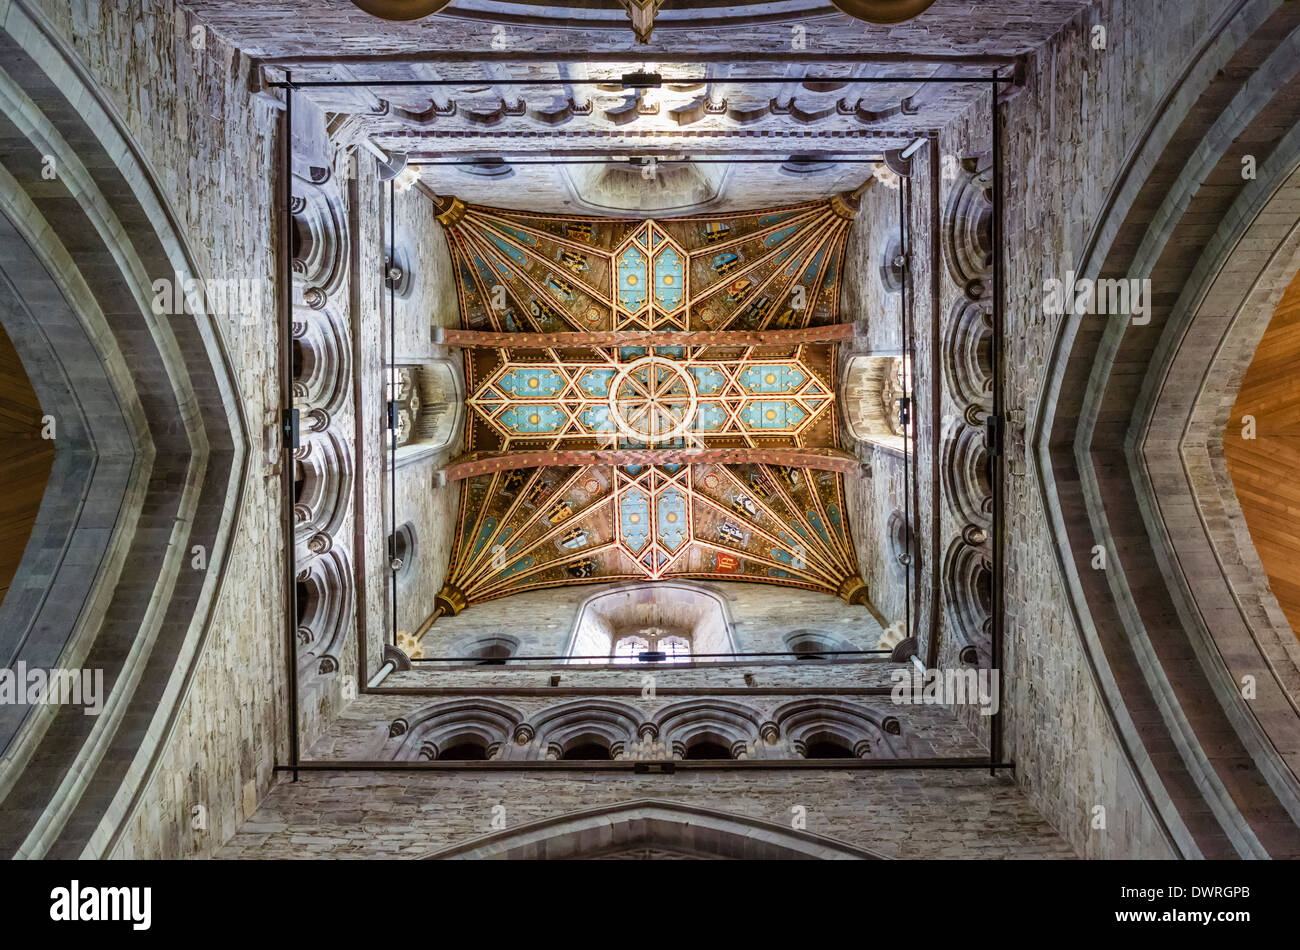 Ceiling inside the tower of St David's Cathedral, St David's, Pembrokeshire, Wales, UK Stock Photo